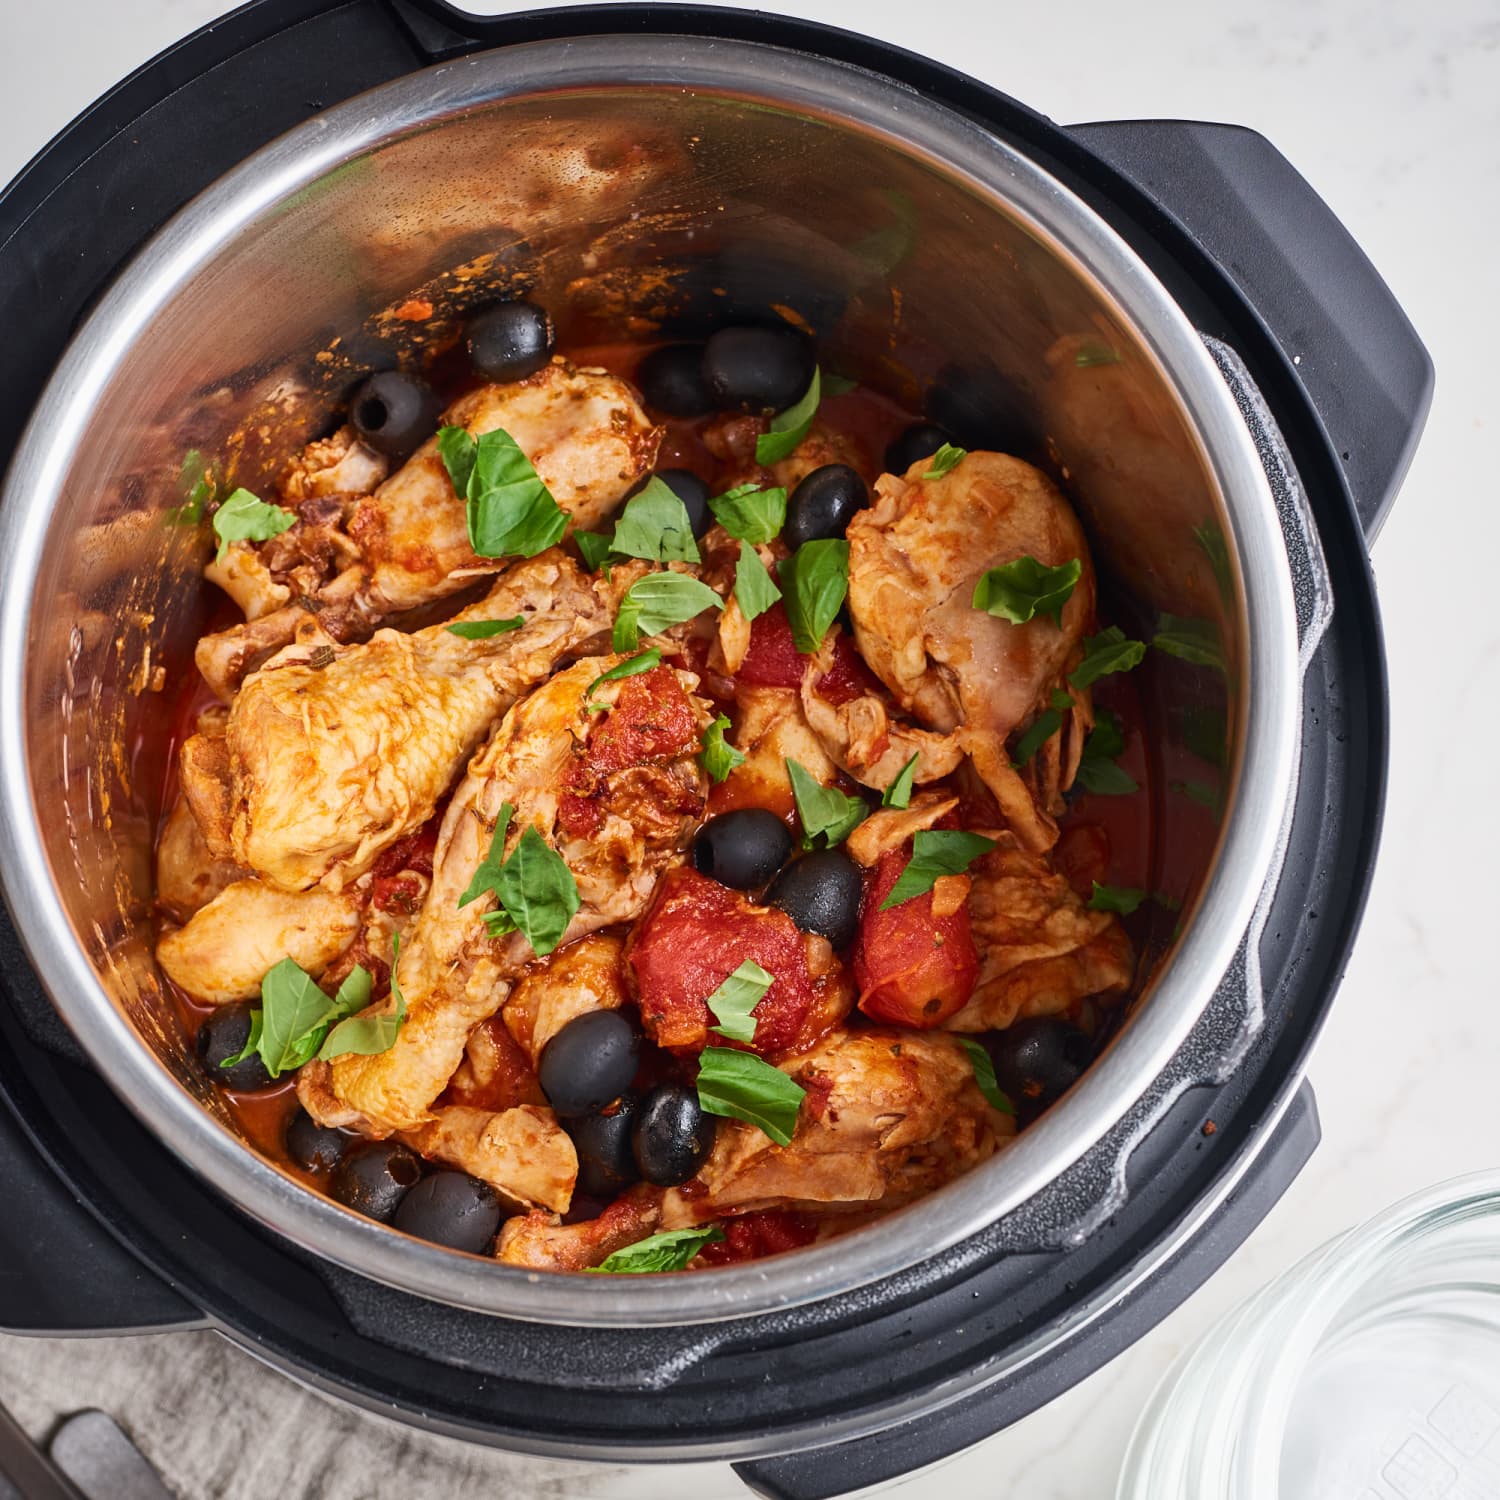 https://cdn.apartmenttherapy.info/image/upload/f_jpg,q_auto:eco,c_fill,g_auto,w_1500,ar_1:1/k%2FPhoto%2FSeries%2F2019-10--power-hour-instant-pot%2FPower-Hour-Instant-Pot_002